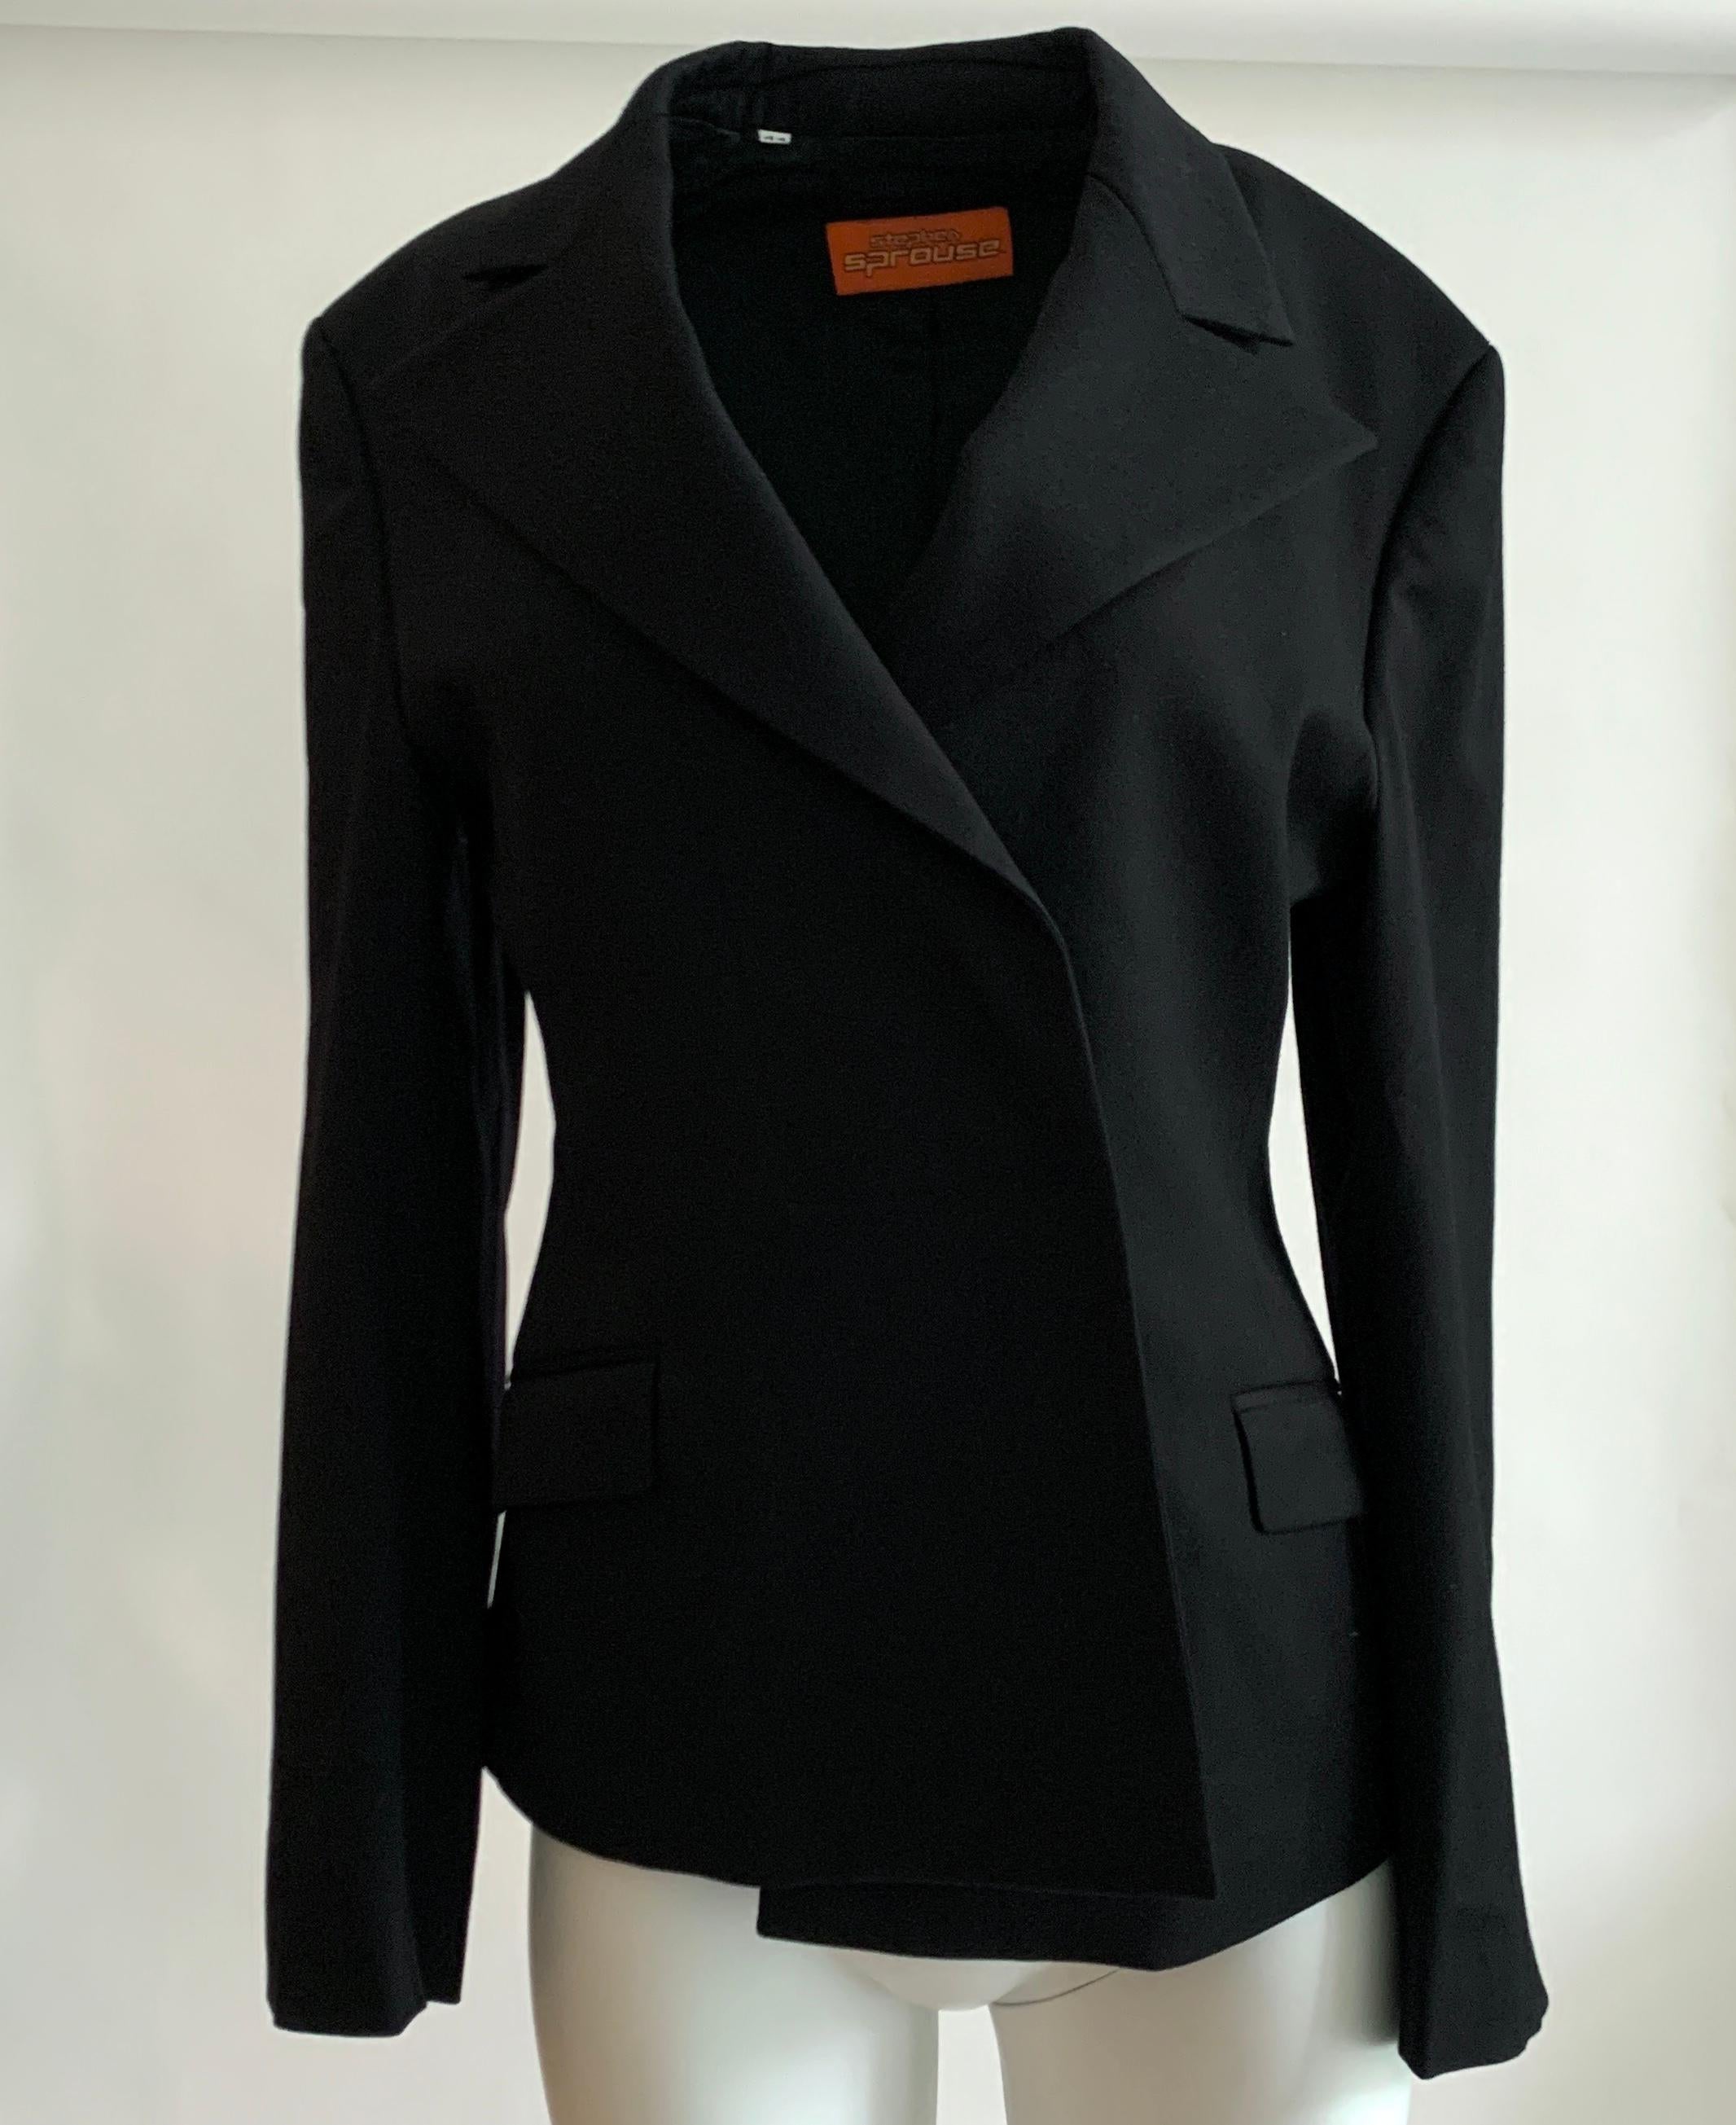 Vintage Stephen Sprouse black blazer in a classic cut with  velcro closure at front. Circa 1990s. Flap pockets at front and a flap detail at cuffs that also fasten with velcro. The buttonless front gives a super clean and modern look to a tried and